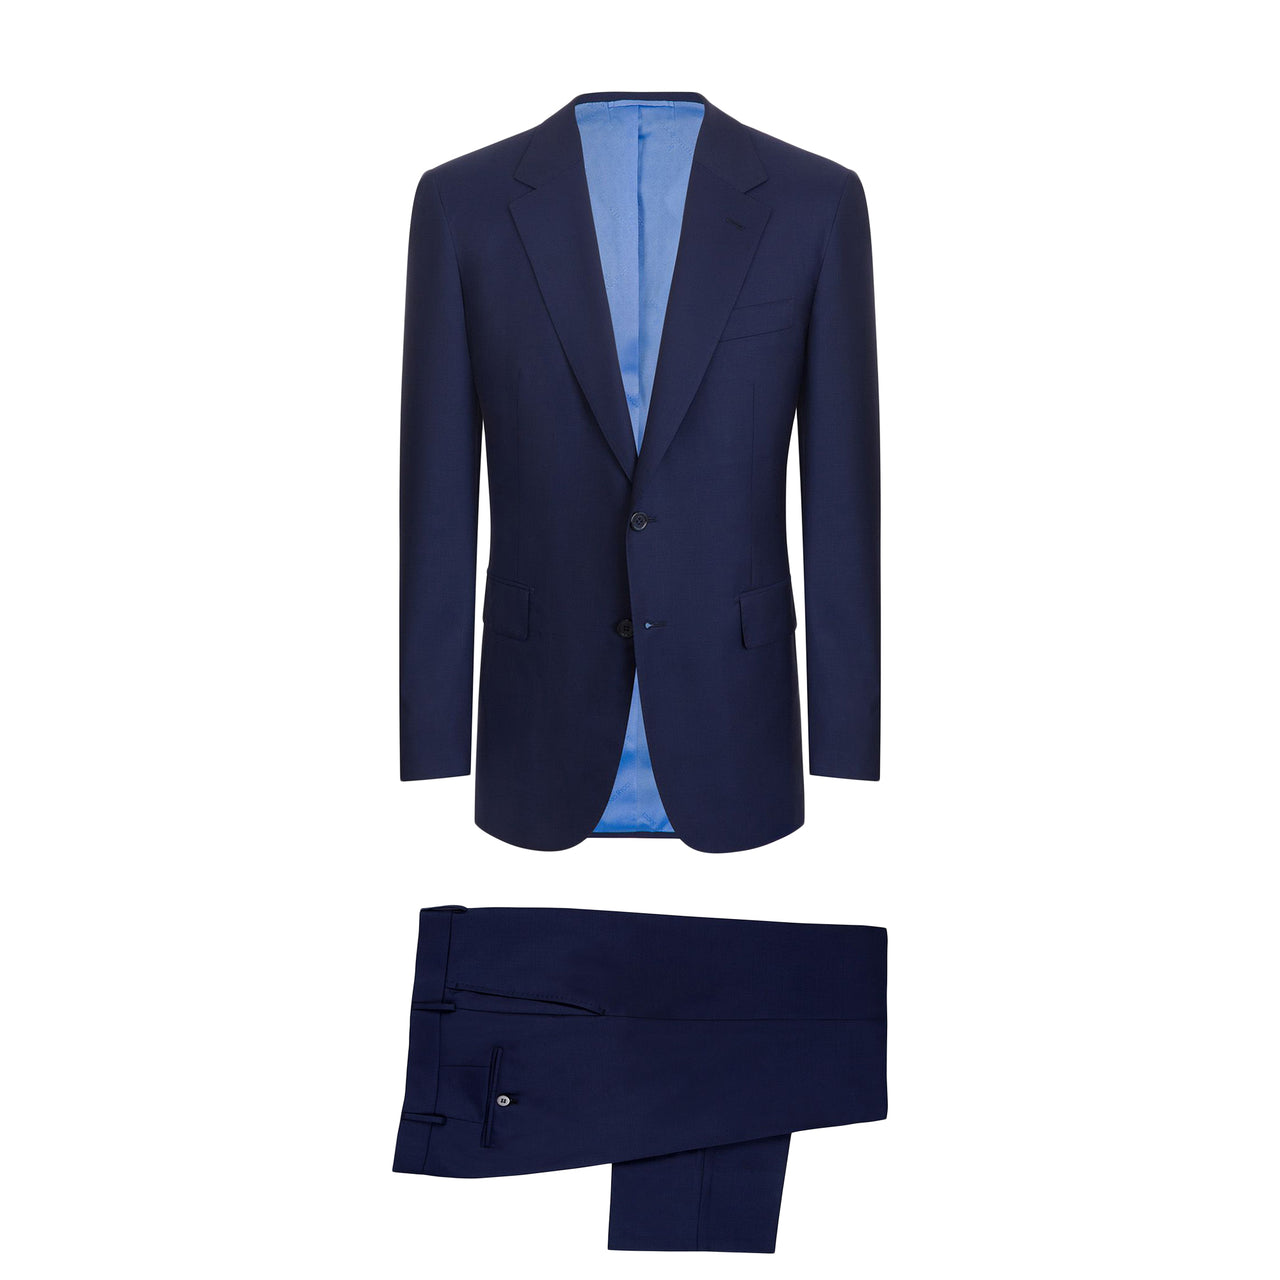 STEFANO RICCI Iconic Sartorial Woven Suit NAVY